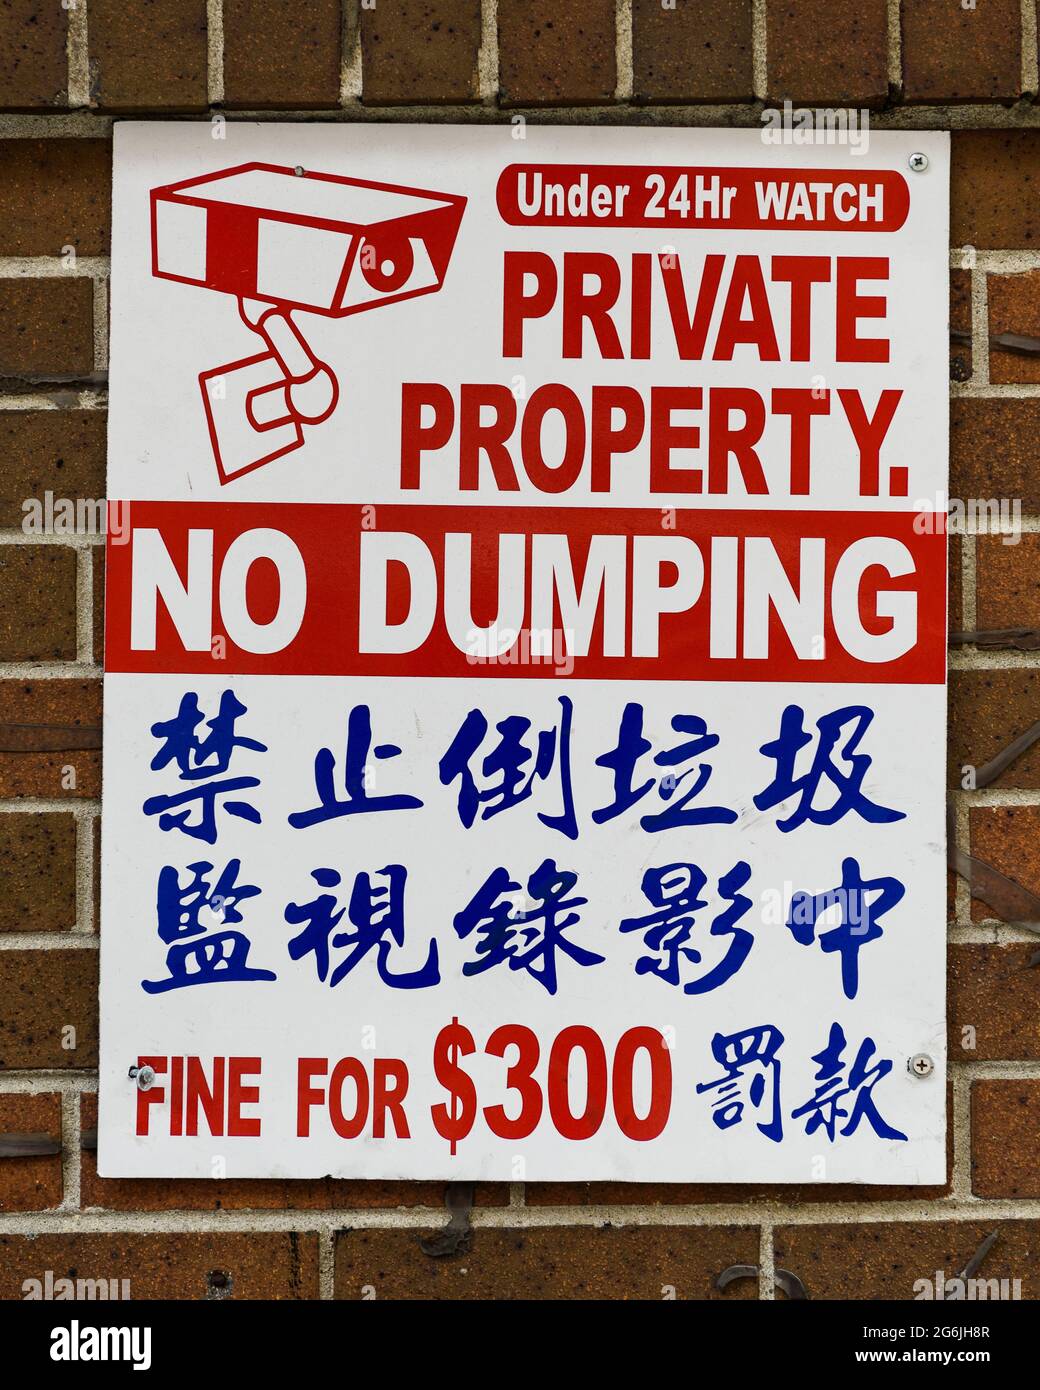 Red and blue sign in Chinatown for Private Property and No Dumping, written in English and Chinese with a fine for $300 Stock Photo